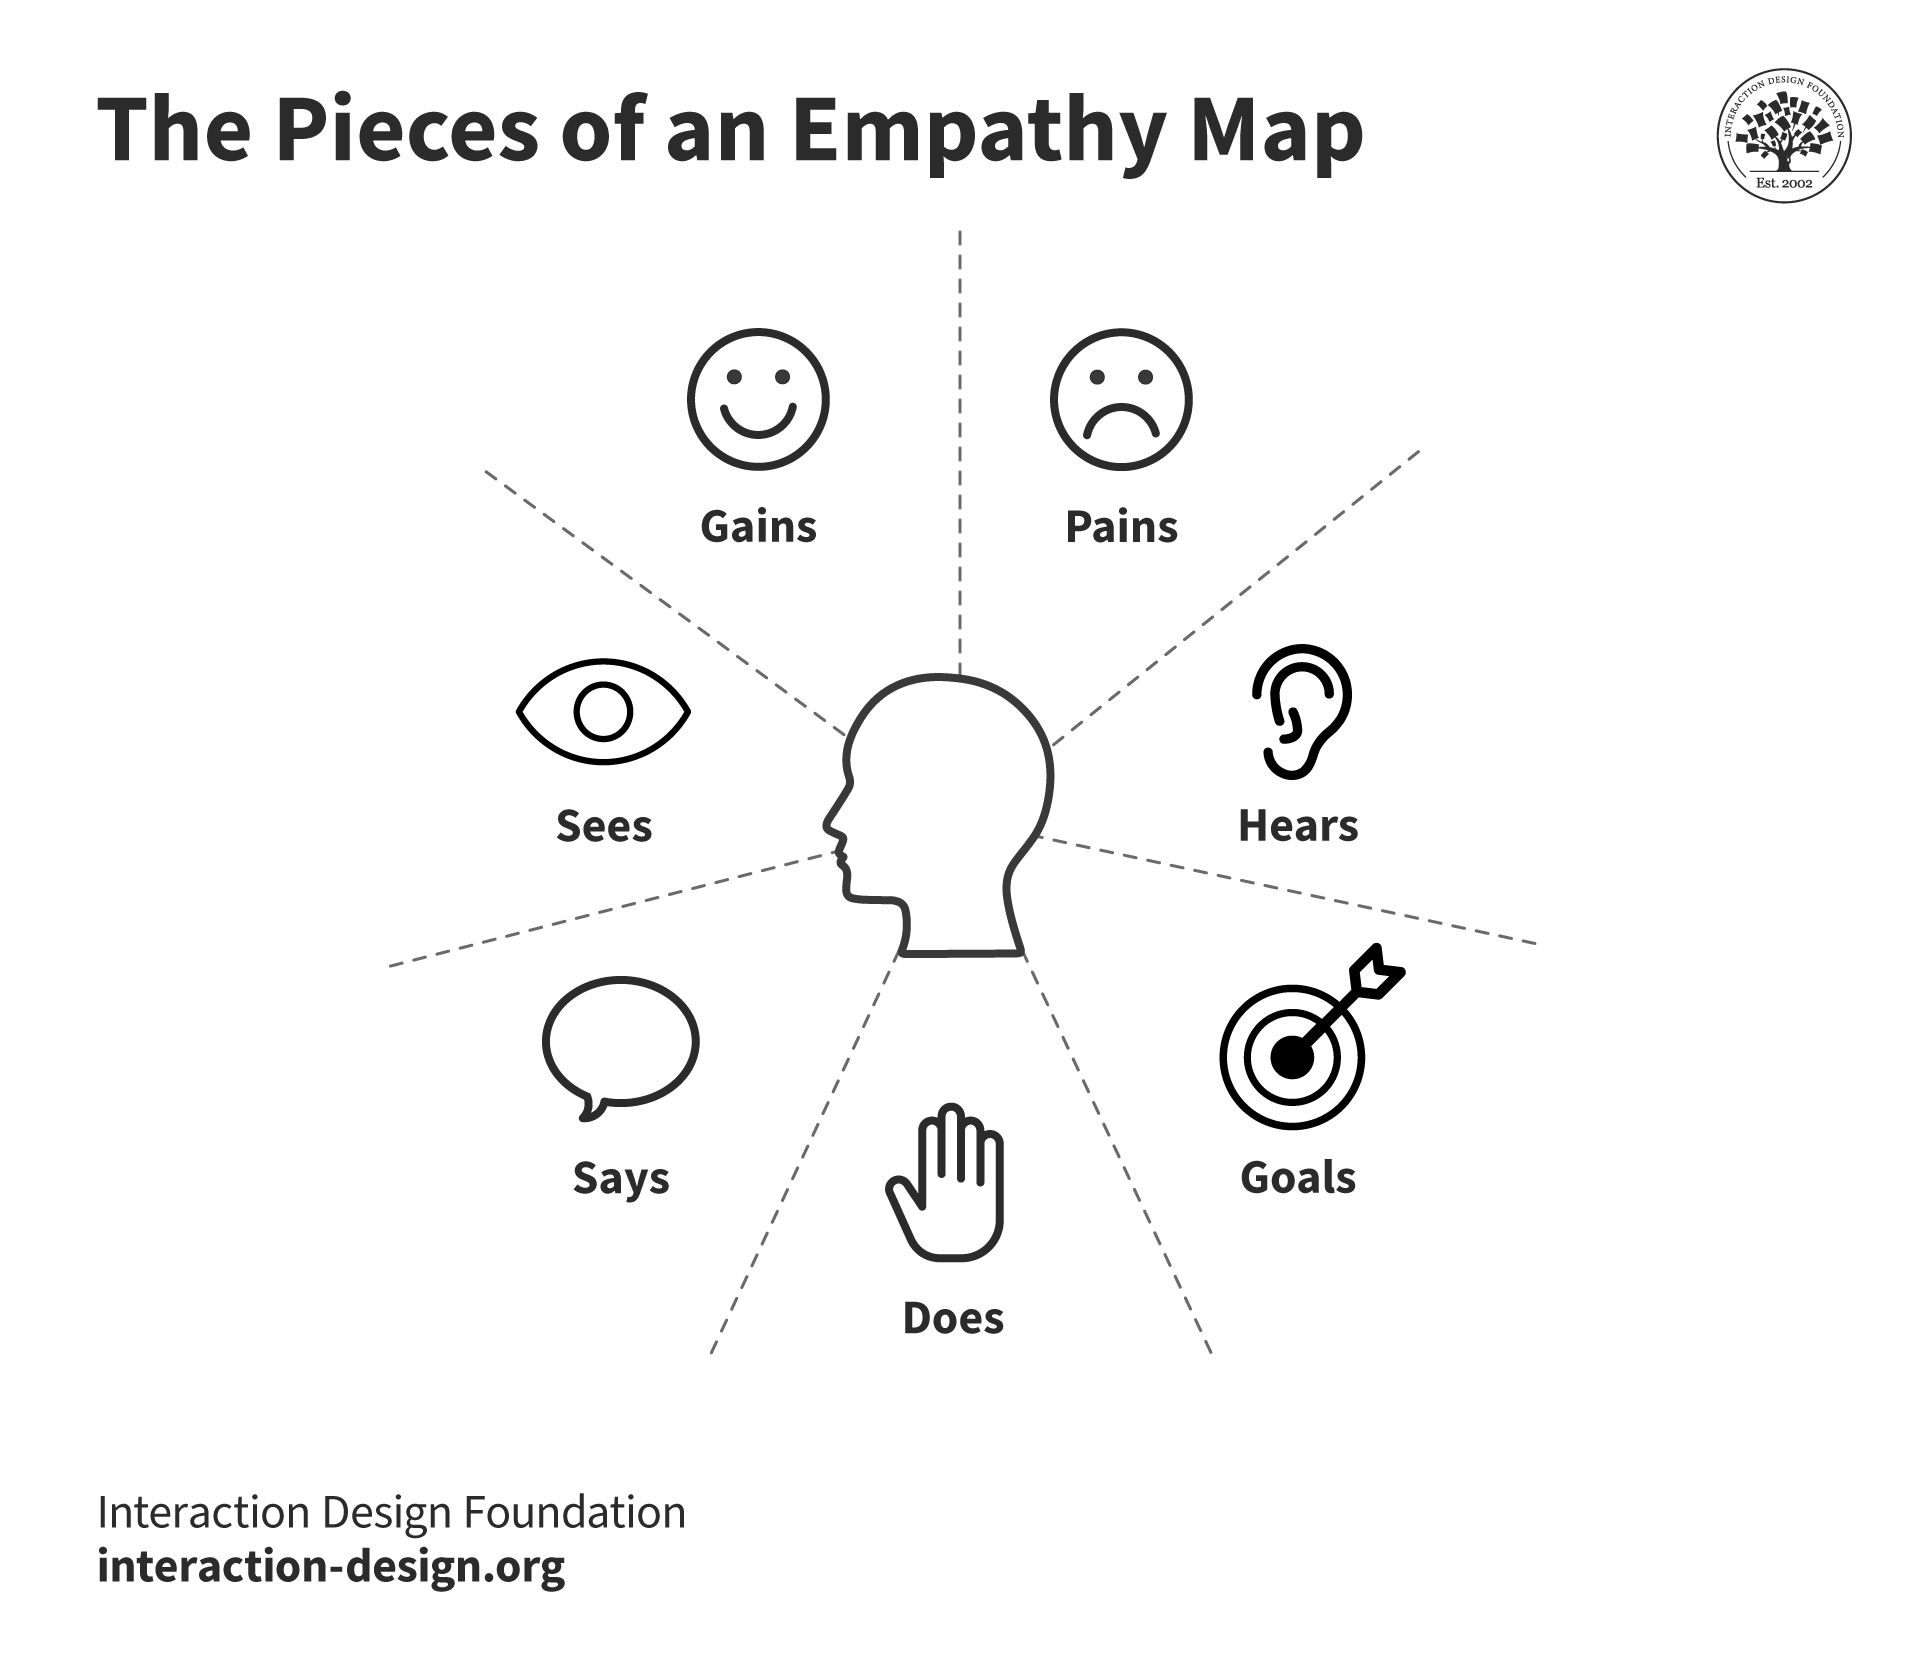 The updated version of the Empathy Mapping Canvas by creator Dave Grey is made up of the sections: Goals, Does, Says, Sees, Hears, Gains, and Pains.